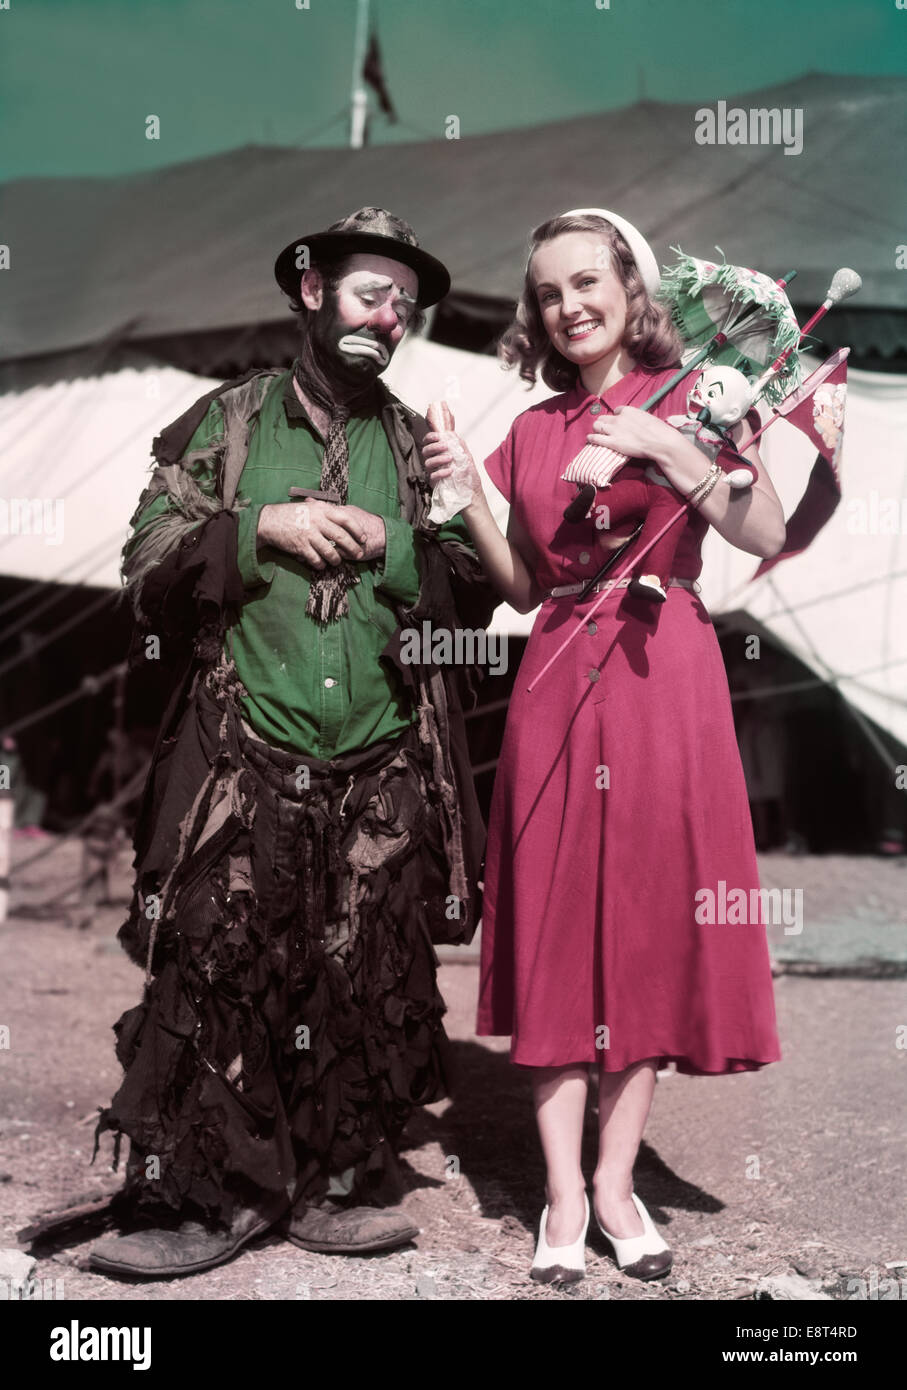 1940s 1950s SMILING BLOND WOMAN AT CIRCUS HOLDING HOT DOG AND PRIZES STANDING NEXT TO HUNGRY SAD MAN HOBO CLOWN EMMETT KELLY Stock Photo